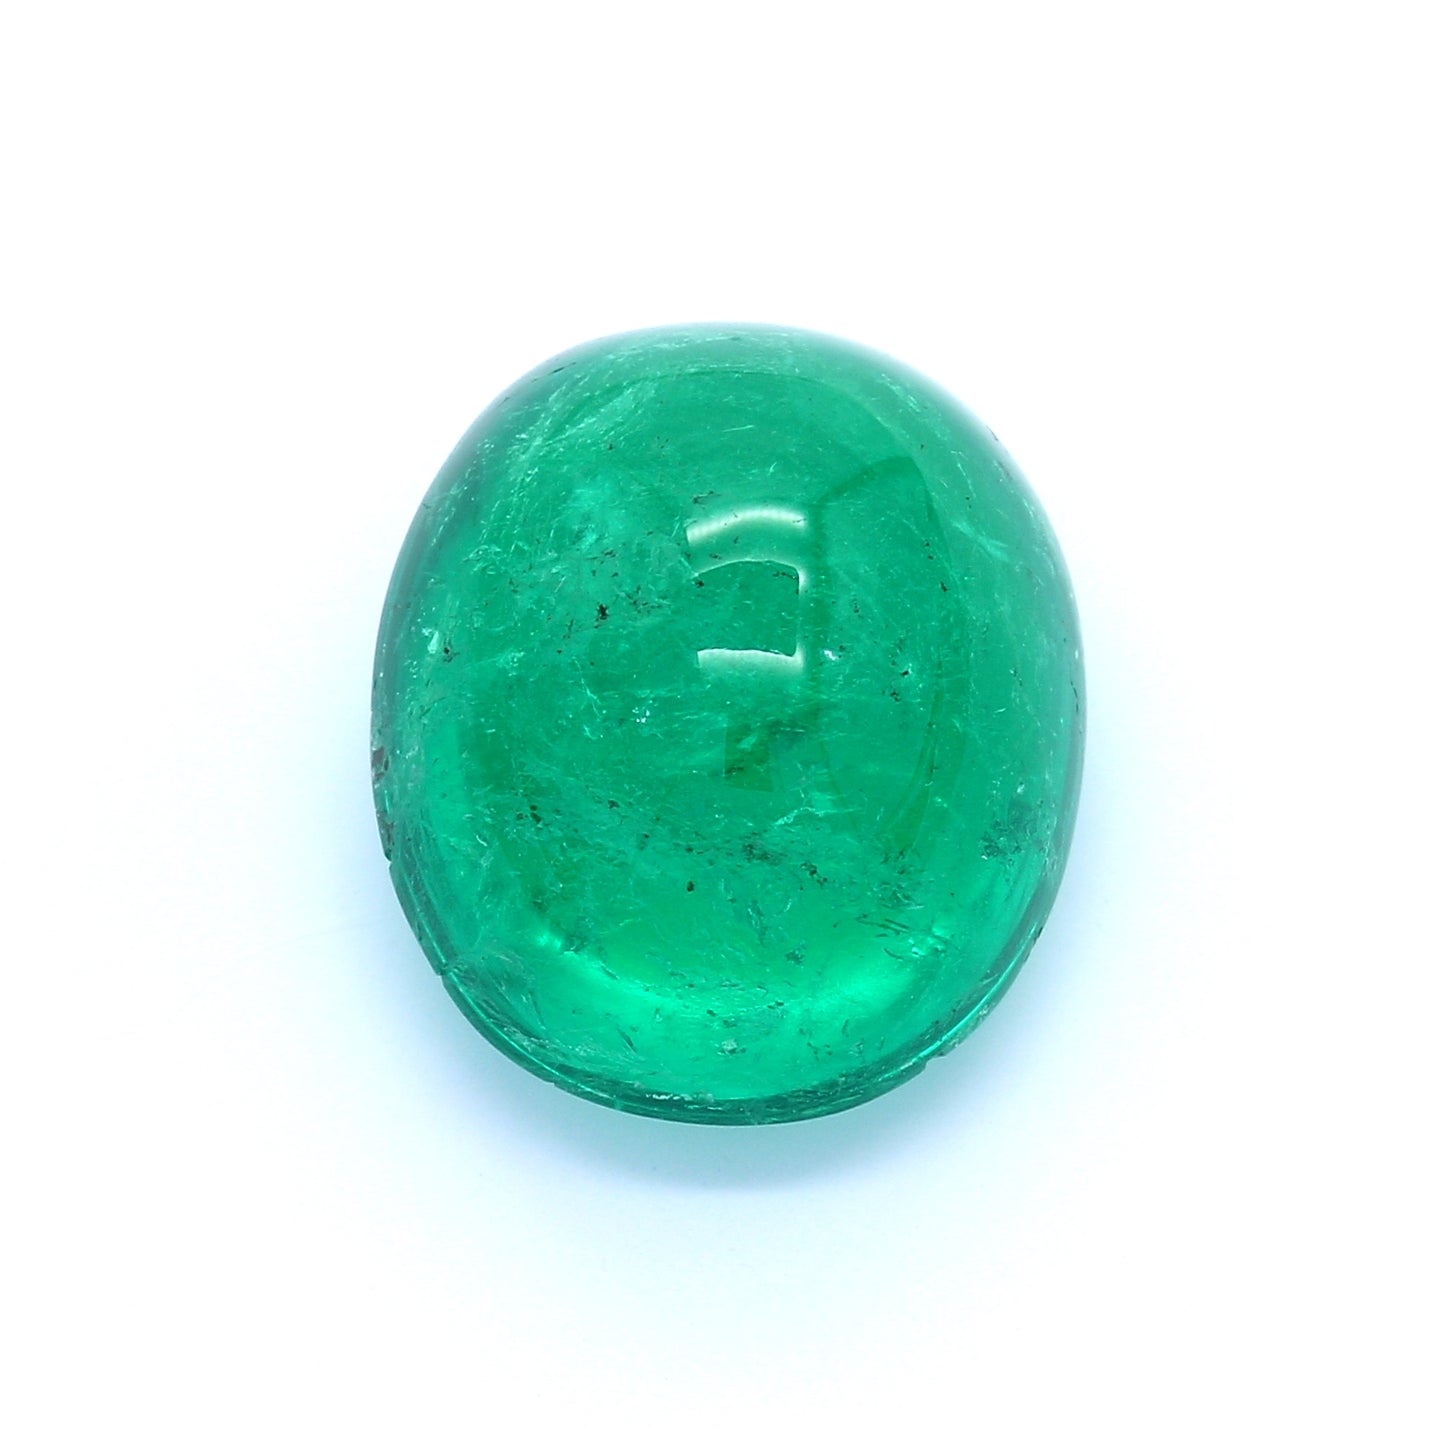 17.20ct Oval Cabochon Emerald, Moderate Resin, Colombia - 16.77 x 14.56 x 10.68mm